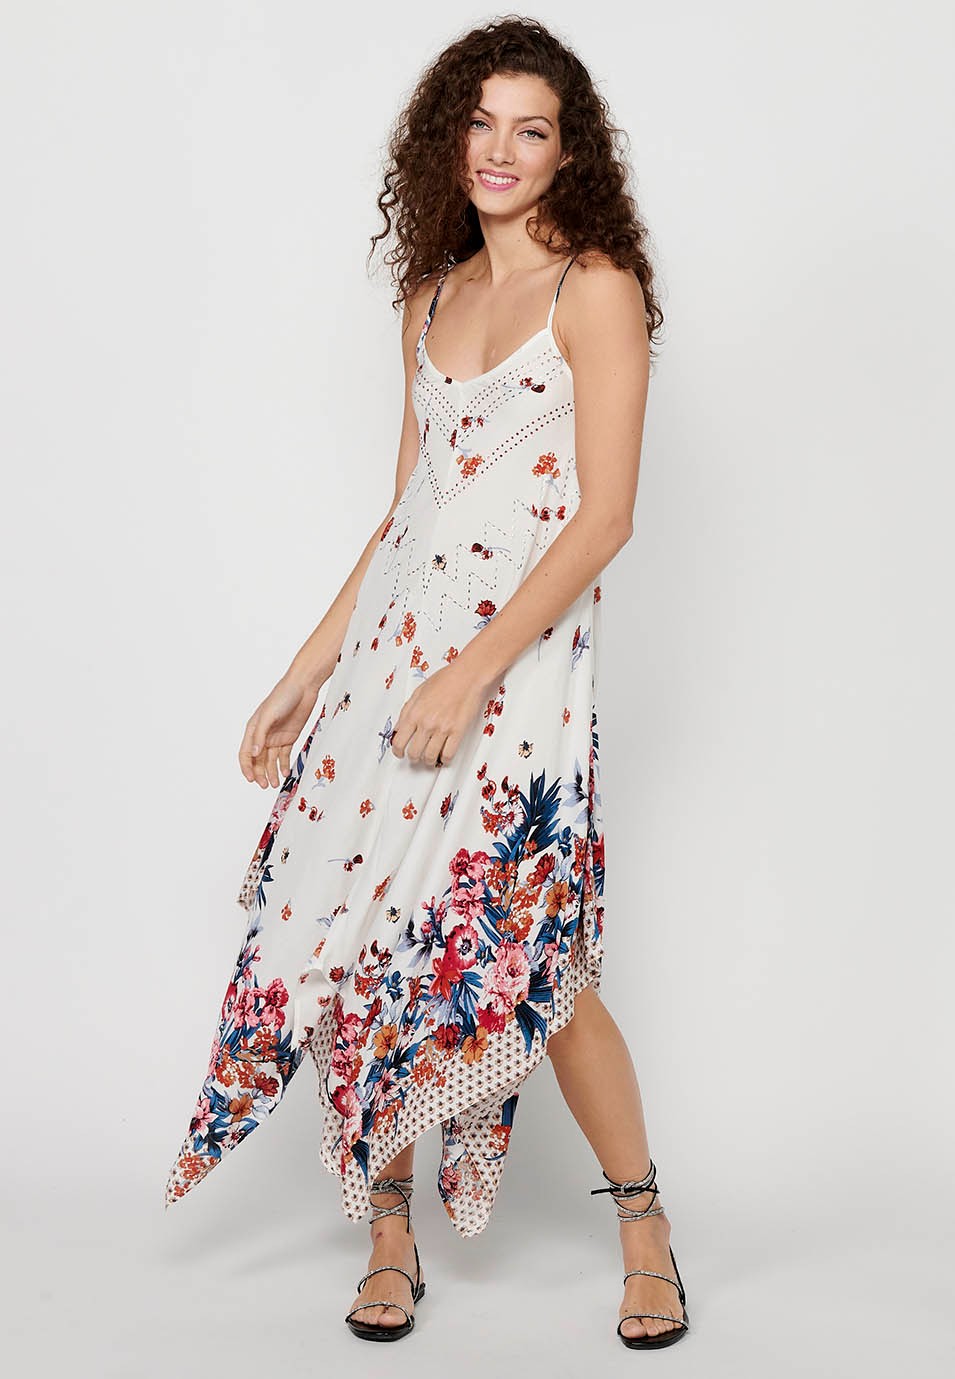 Strap Dress with V-neckline and White Floral Print for Women